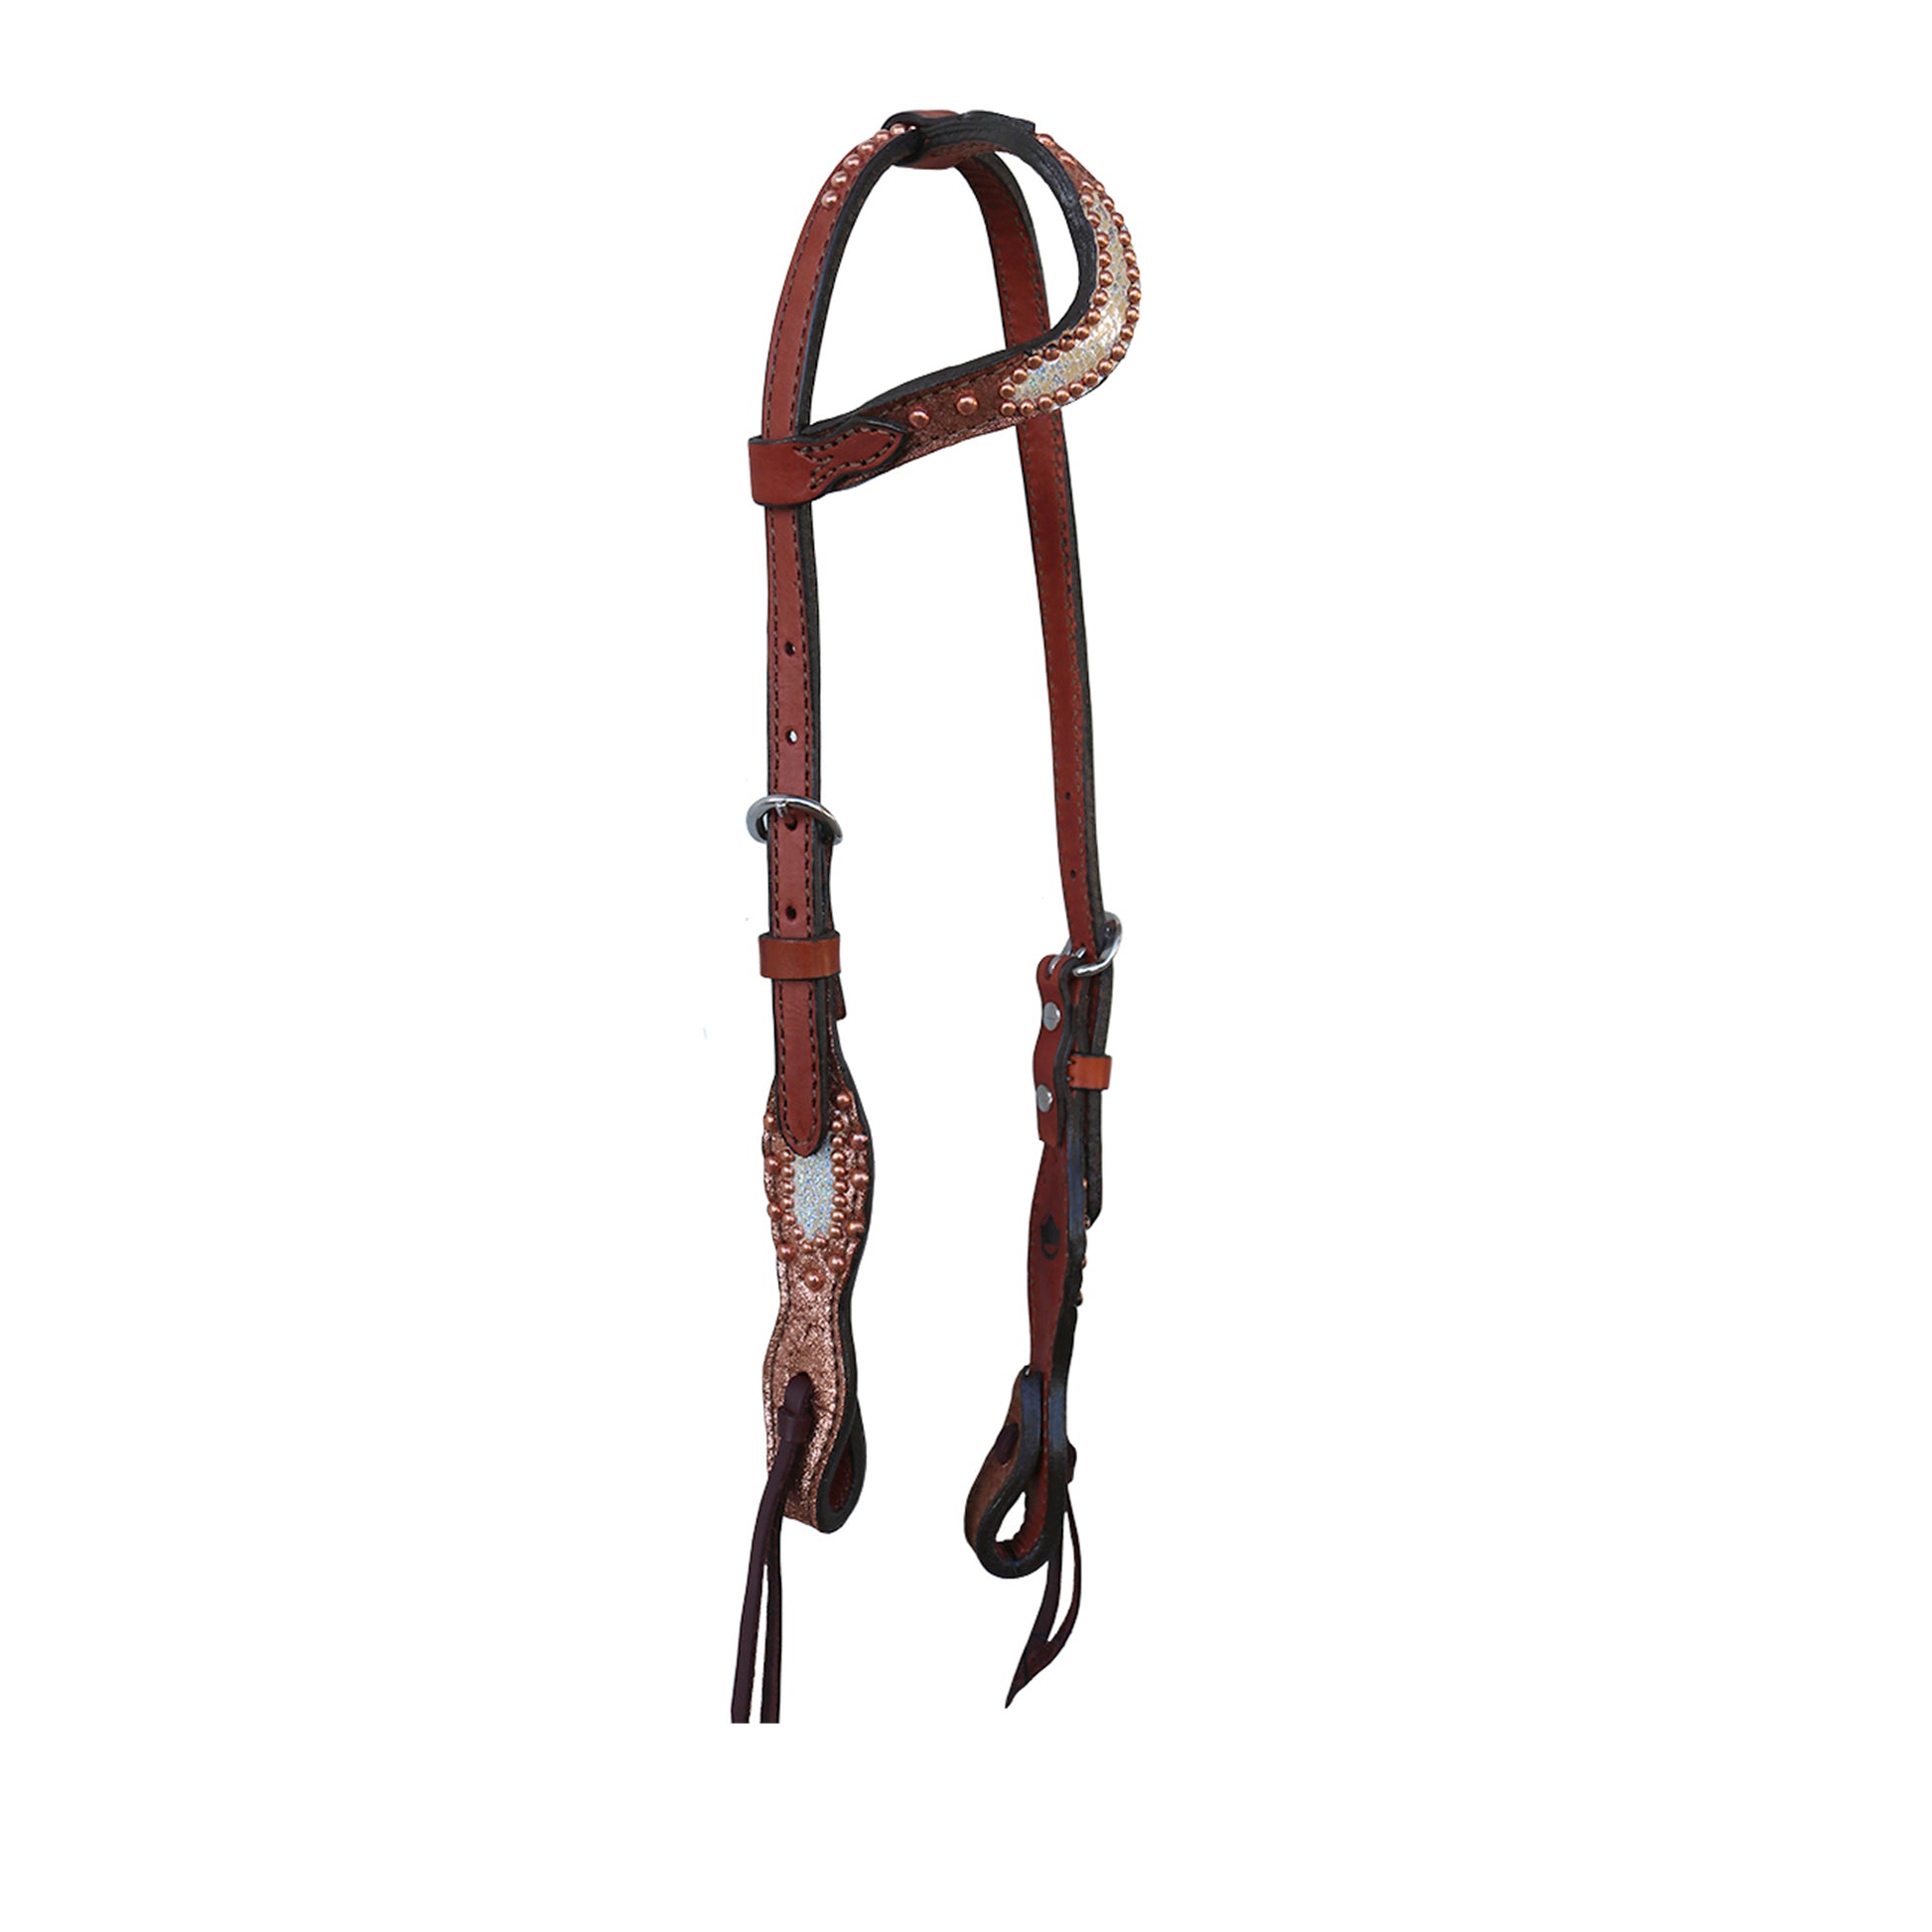 5/8" Wave one ear headstall toast leather copper crackle background overlay and holographic overlay with copper spots.